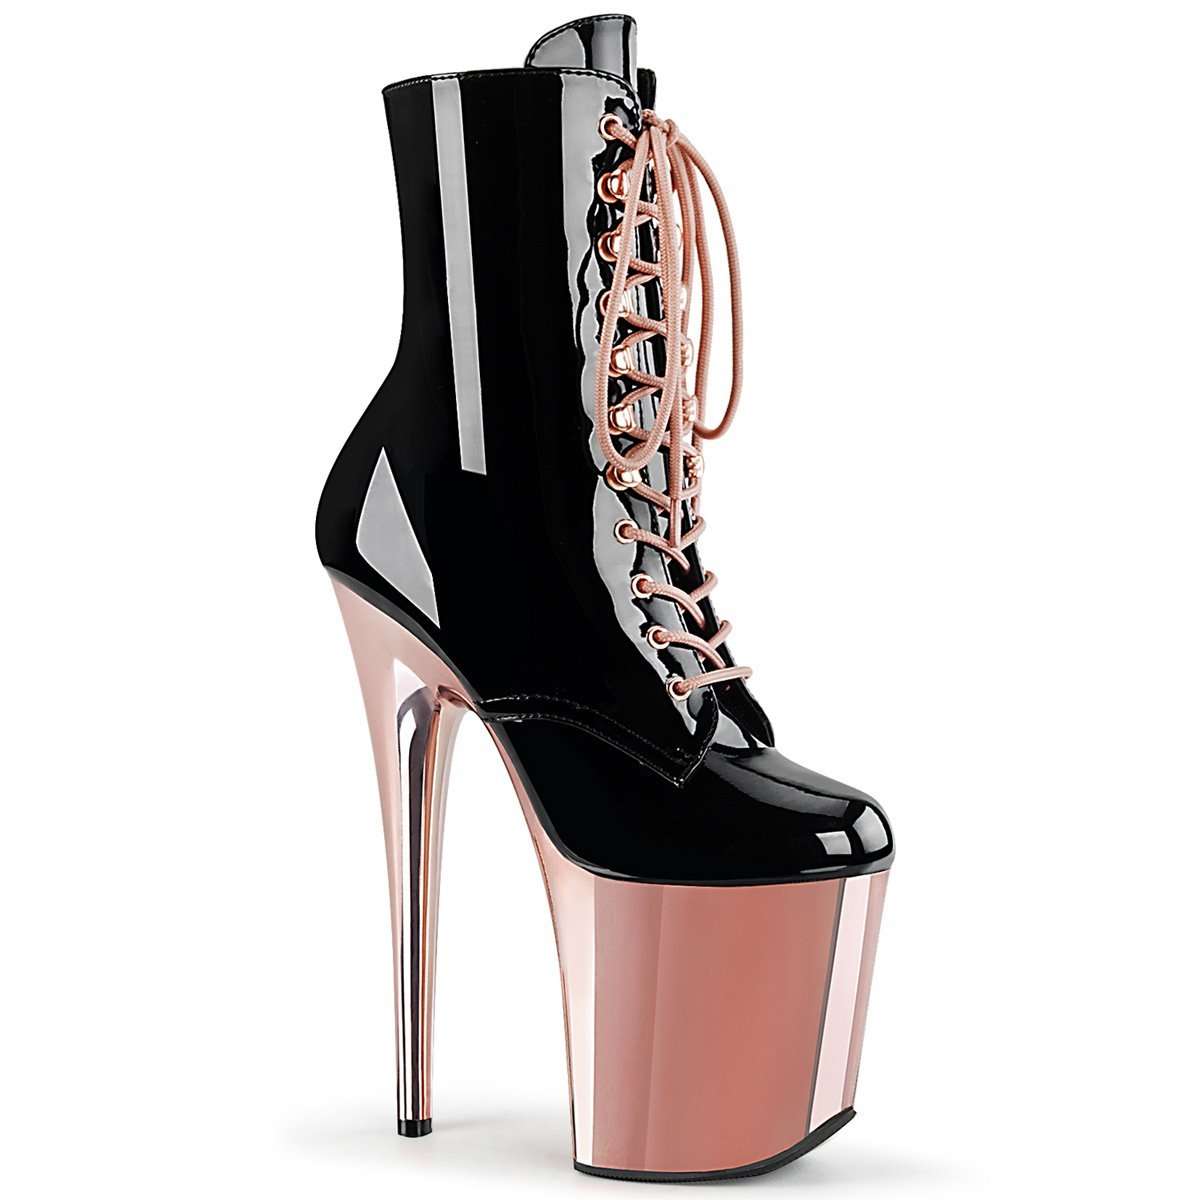 Find The Best Pole Dancing Shoes (2020)